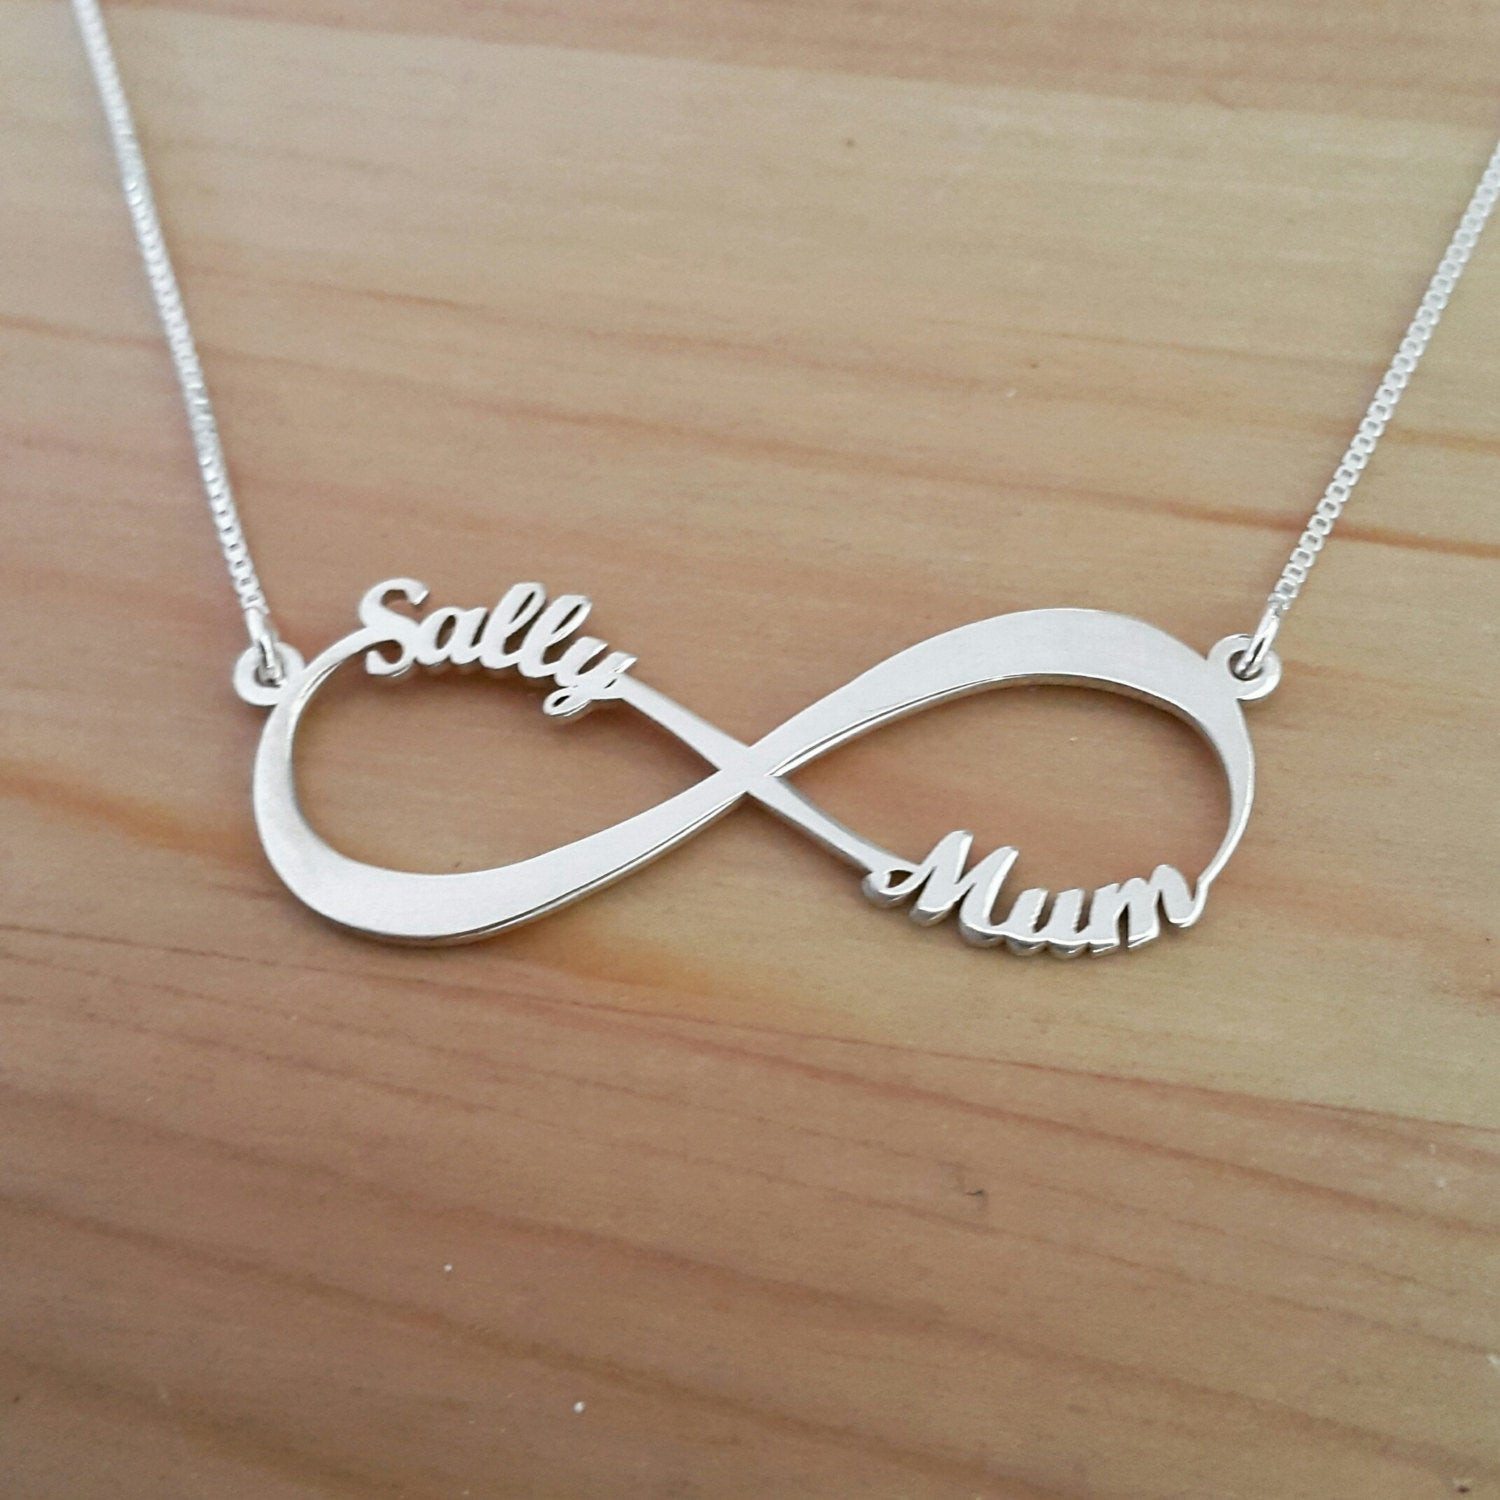 Name Necklace Silver
 2 Name Silver Infinity Necklace Silver Infinity name necklace